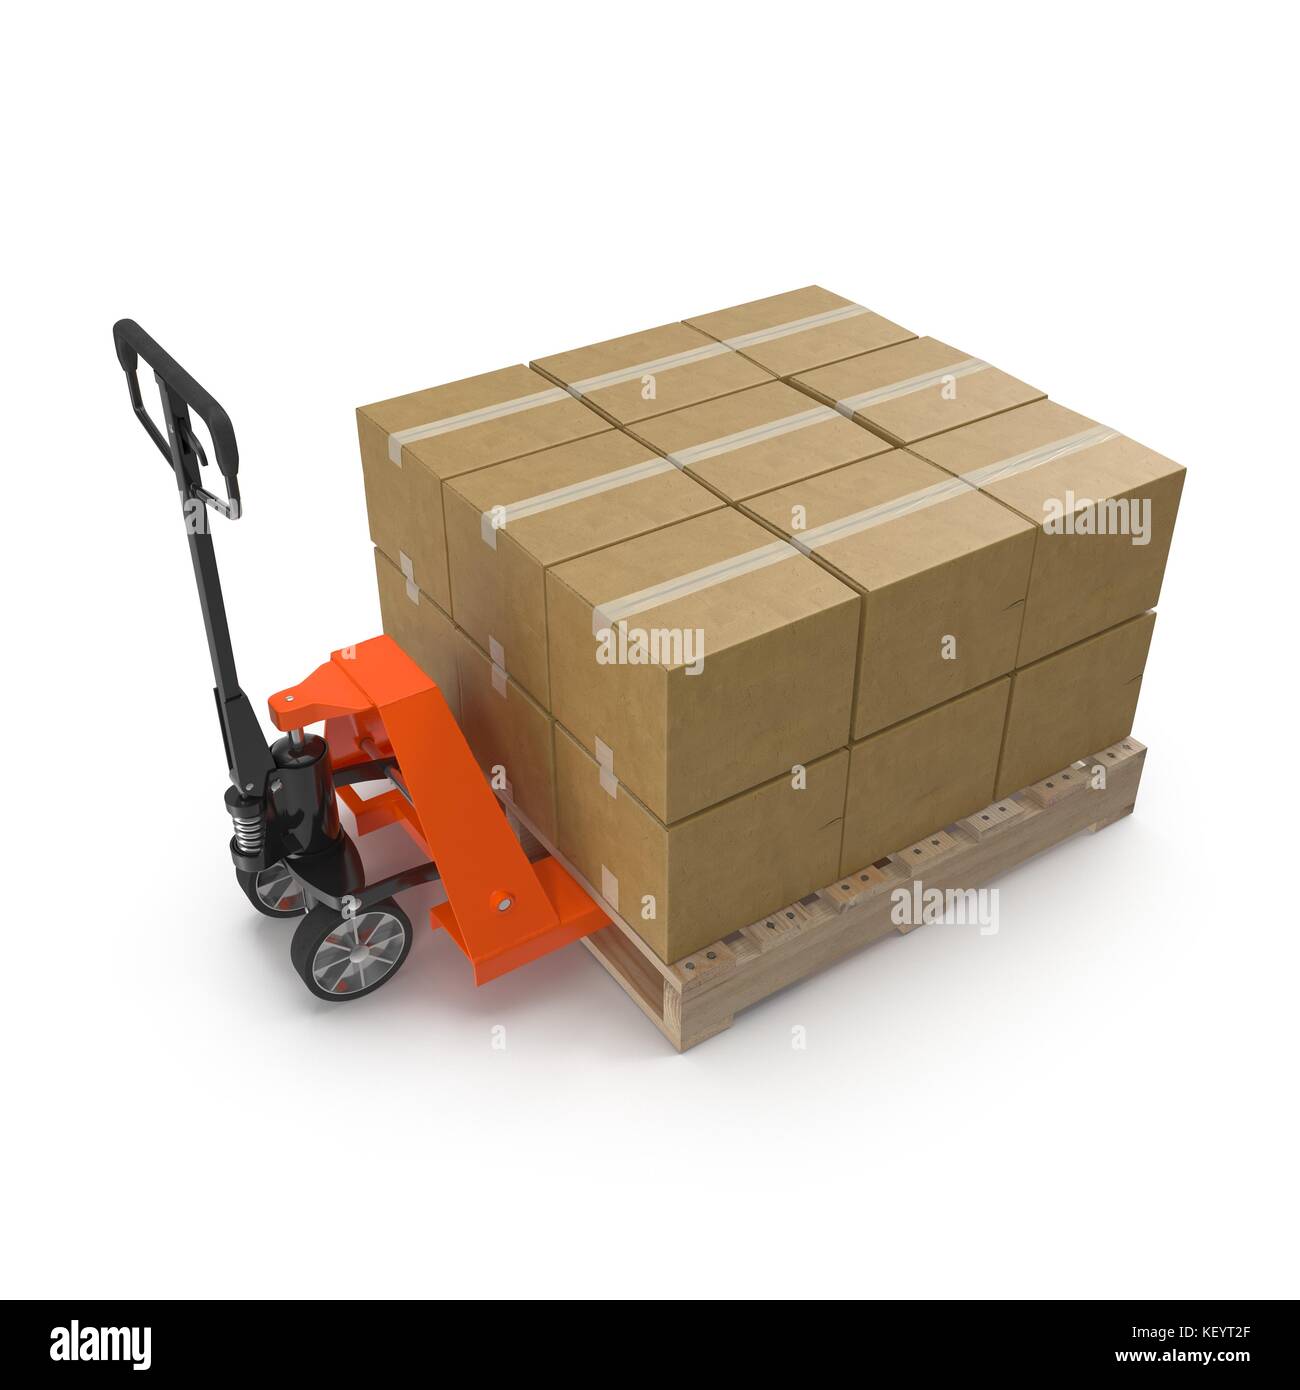 Pallet jack with boxes on pallets 3D illustration. Stock Photo